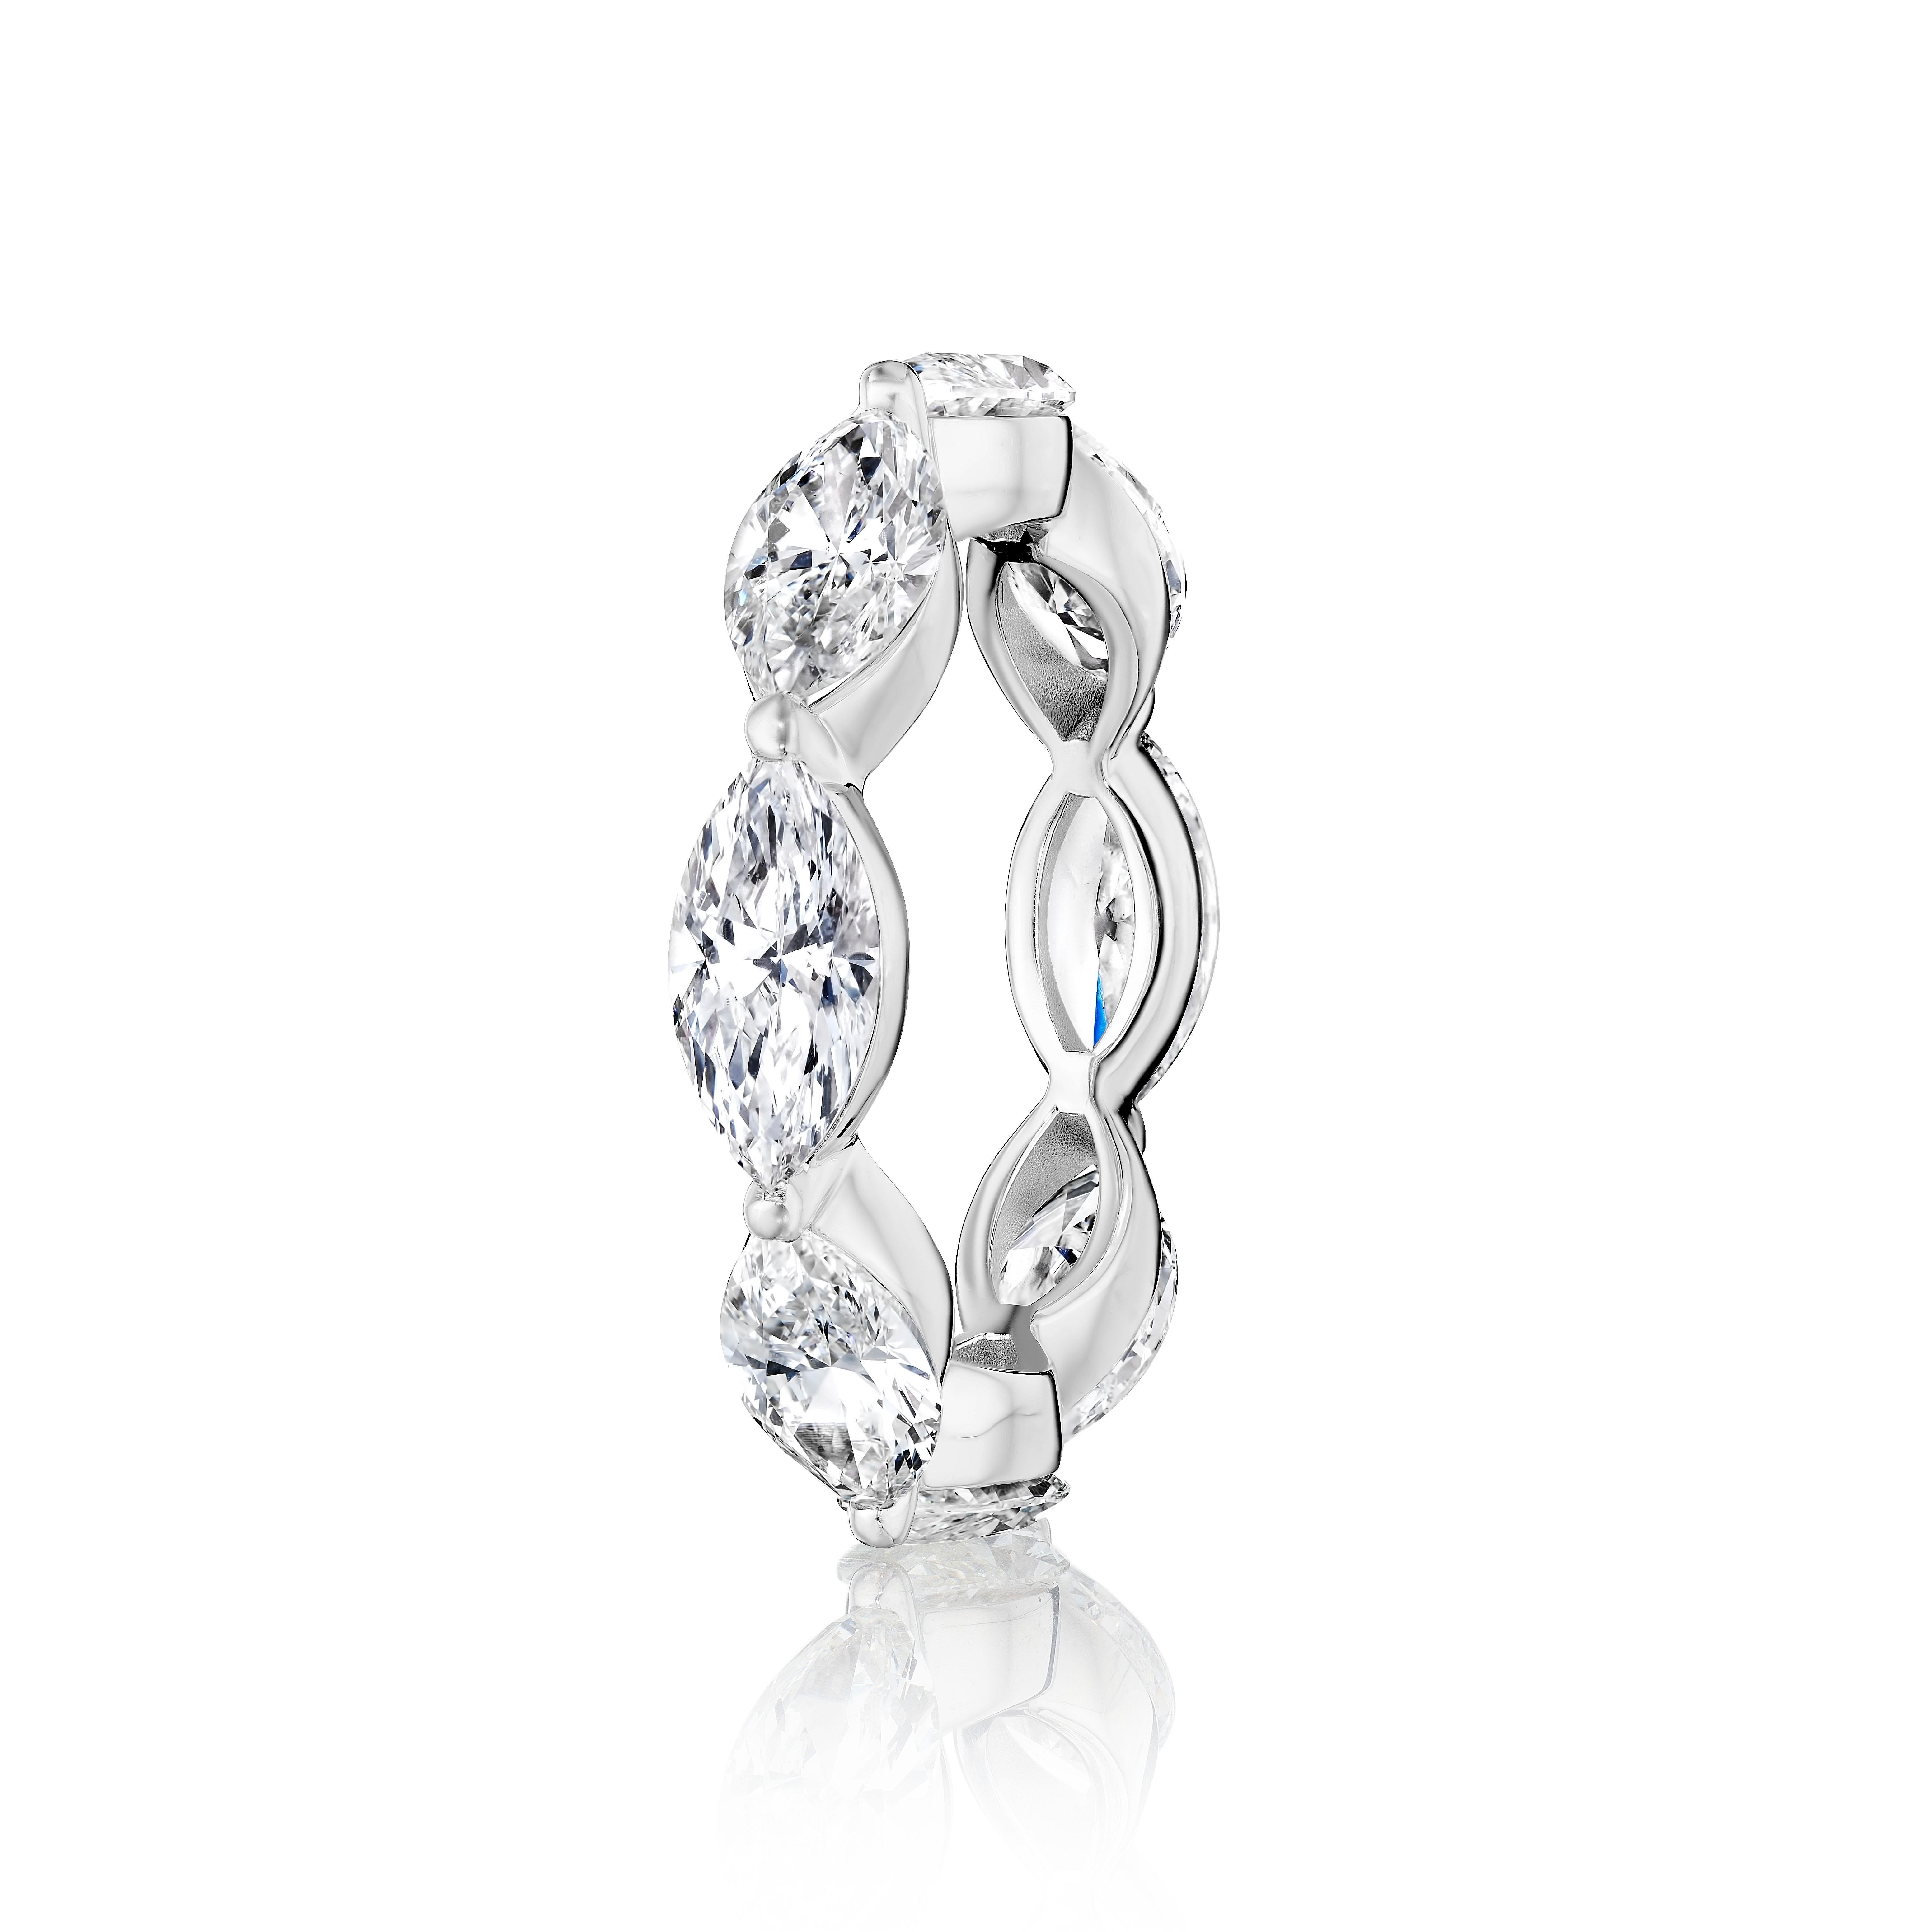 8 Perfectly matched and elongated Marquise Cut Diamonds weighing a total of 5.60 Carats.
Each stone weighs 0.70ct
Stones are DEF color and SI Clarity.
Every stone is certified by GIA.
Set in Platinum.
Size 6.